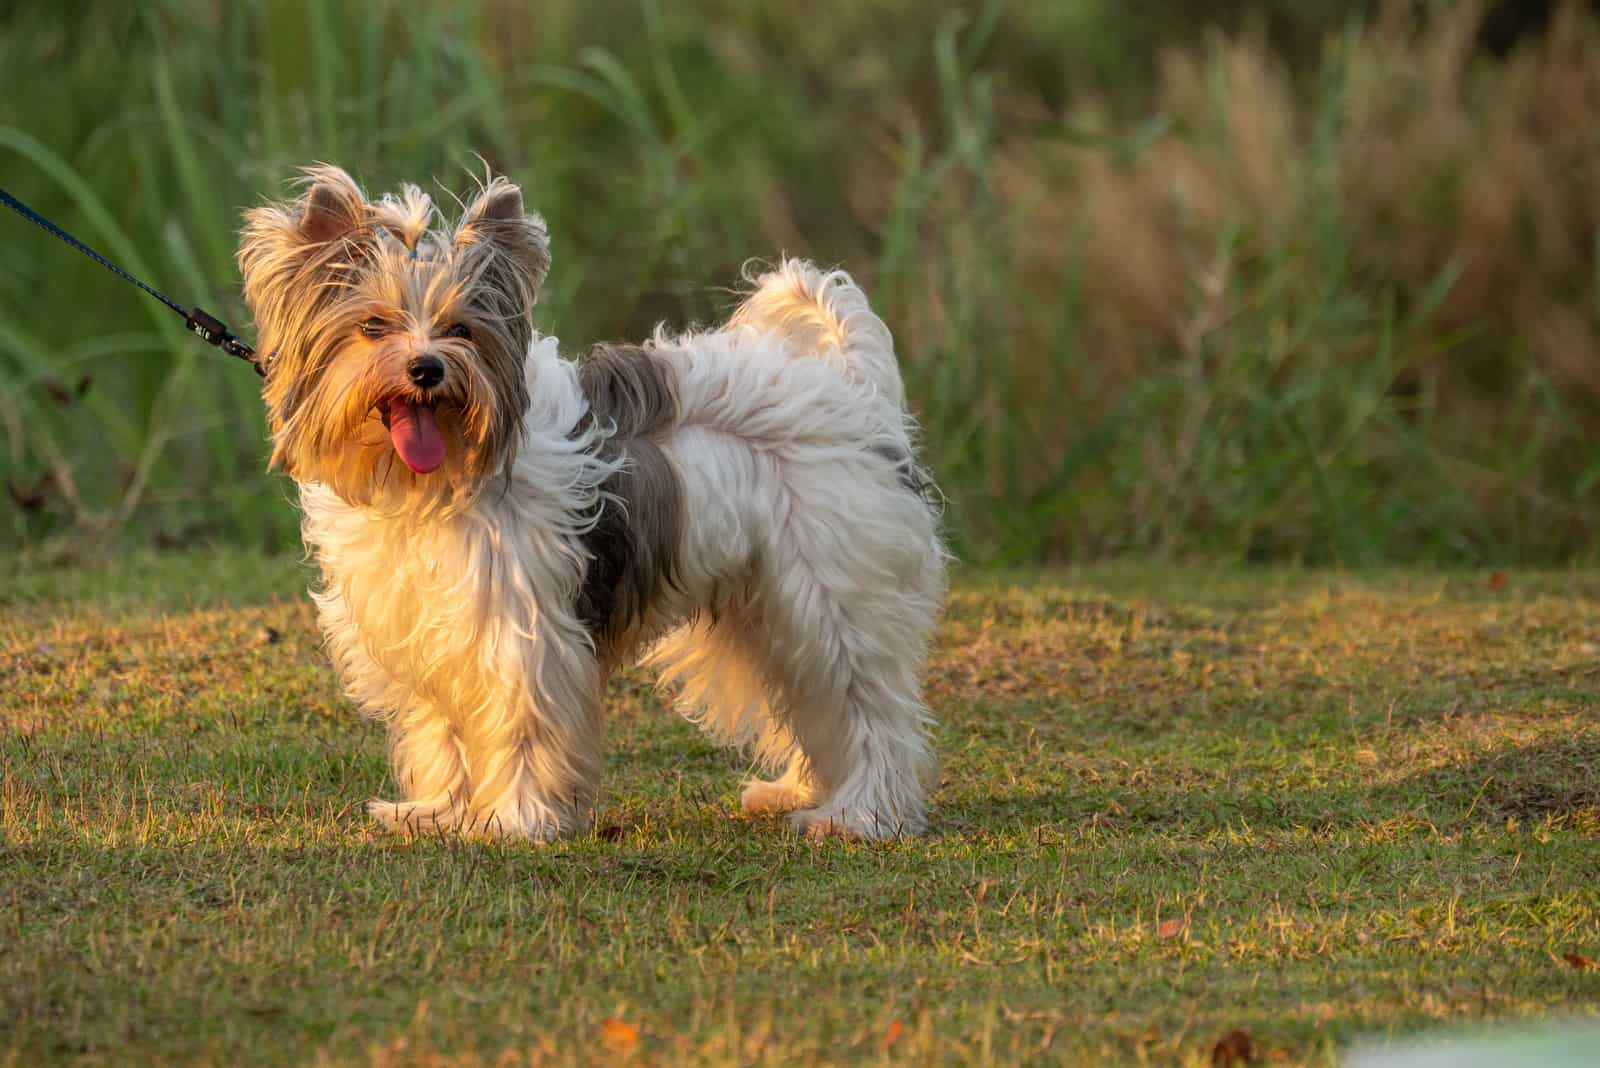 The Yorkshire Terrier stands in the park and looks around